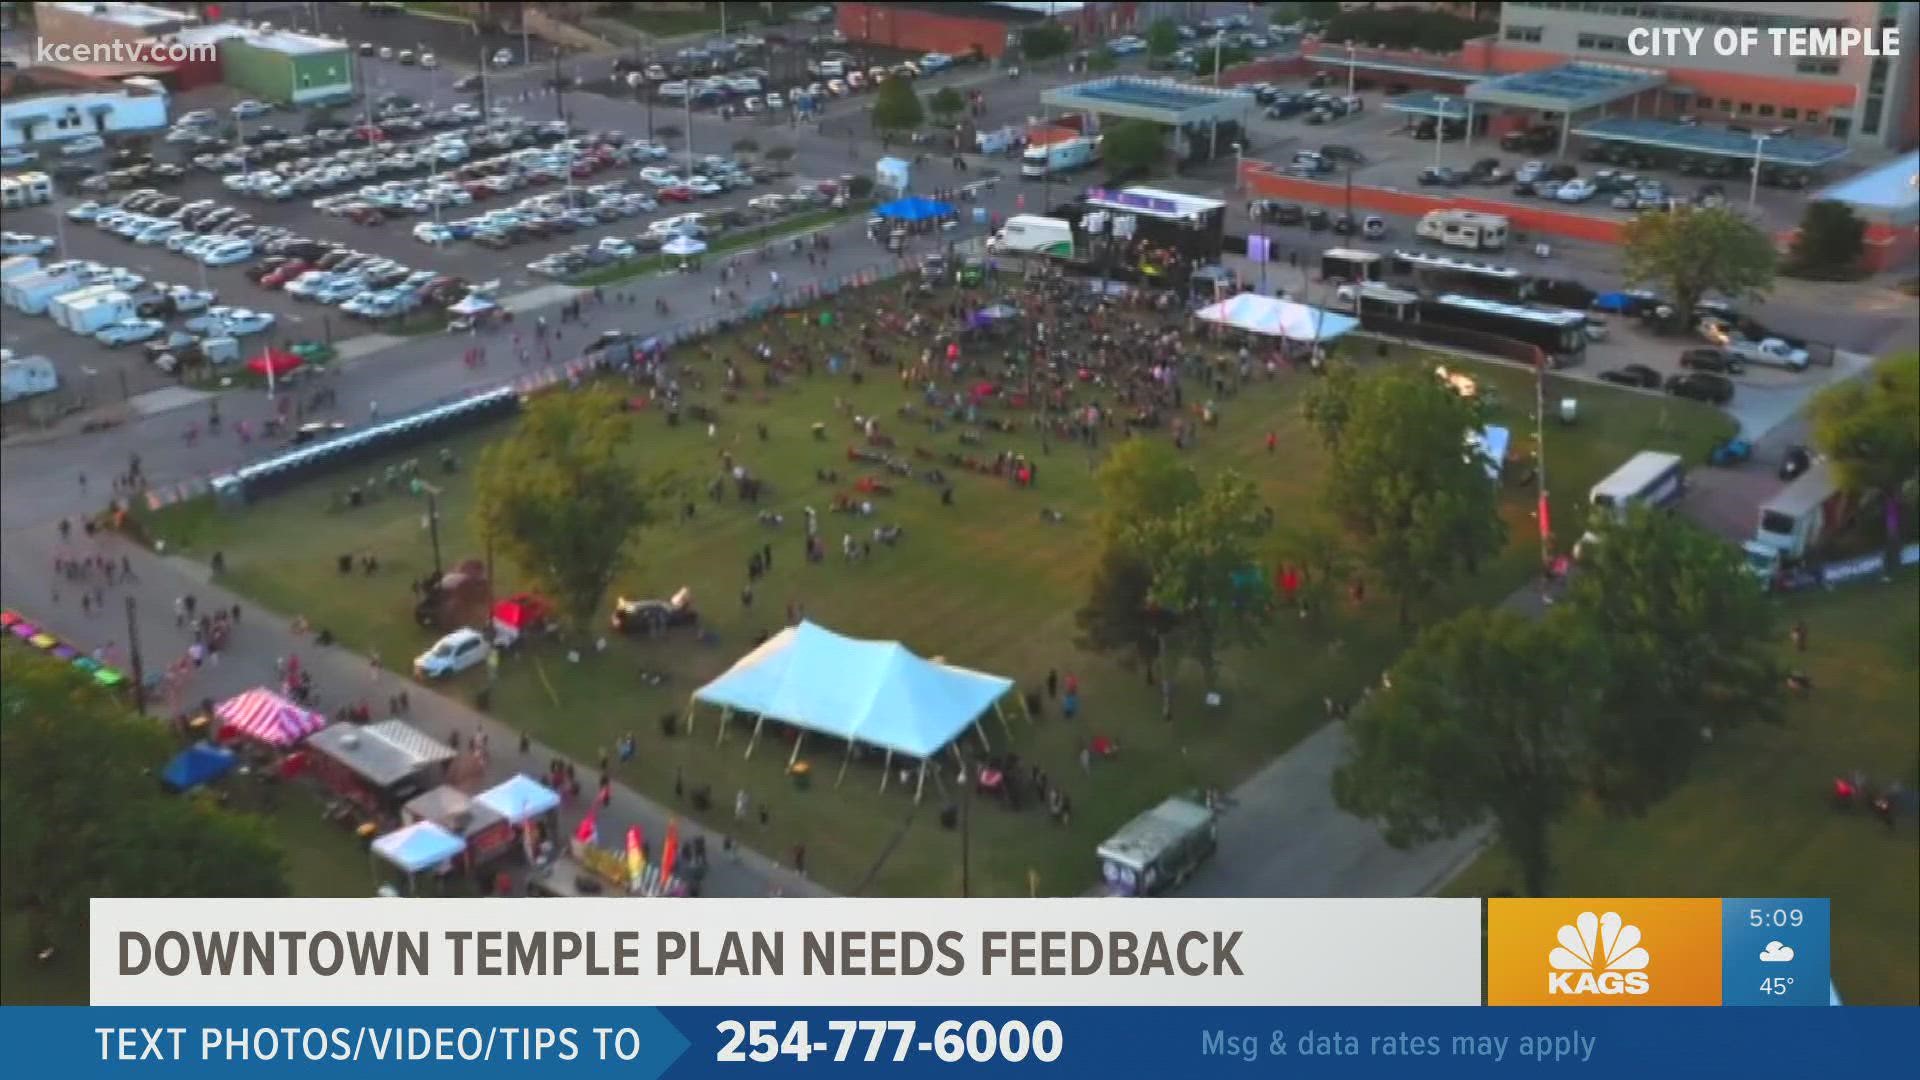 Downtown Temple asks its locals for feedback on the city's present and future developments.